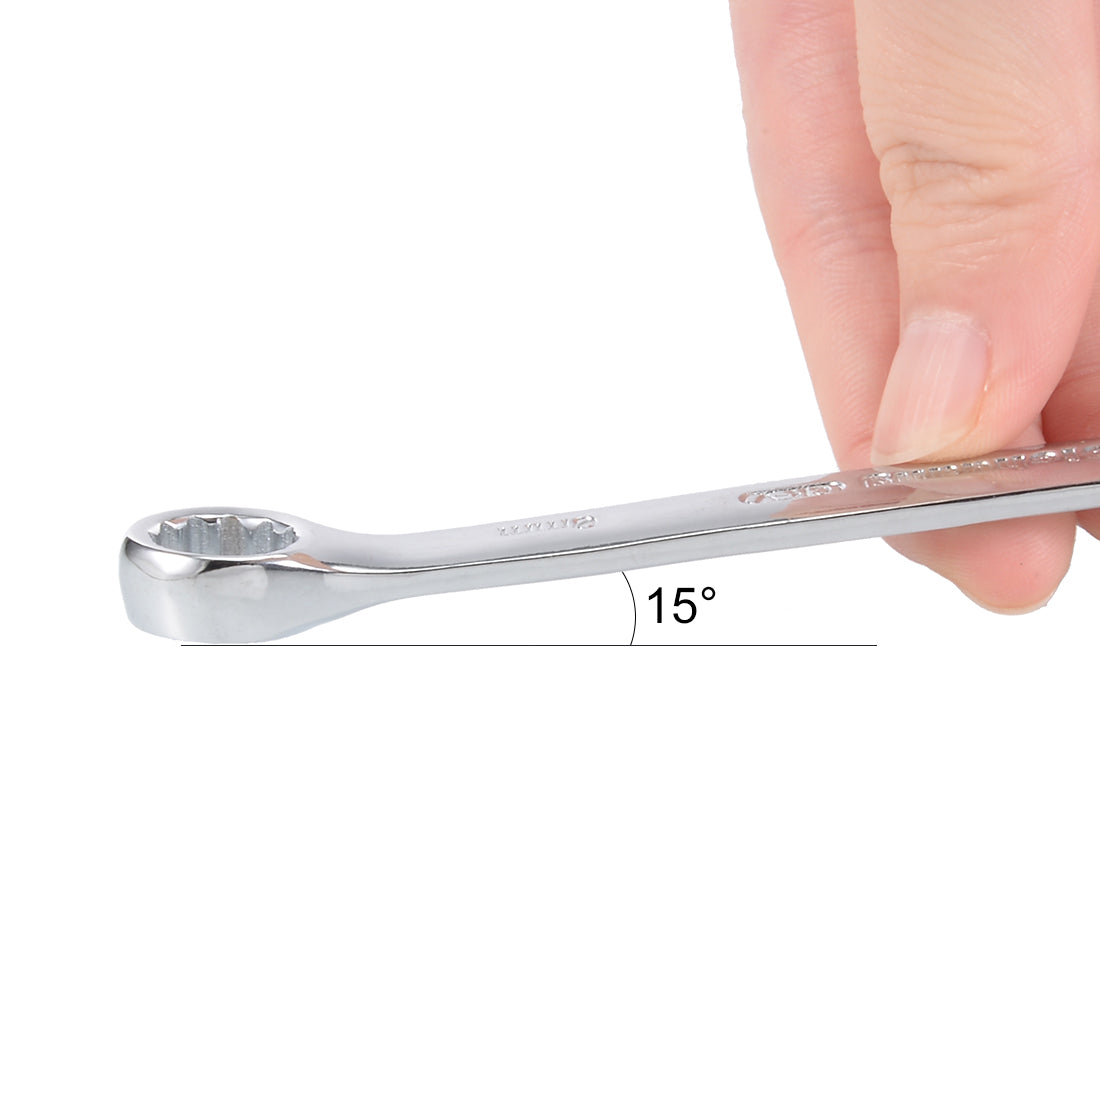 uxcell Uxcell Metric 9mm 12-Point Box Open End Combination Wrench Chrome Finish, Cr-V